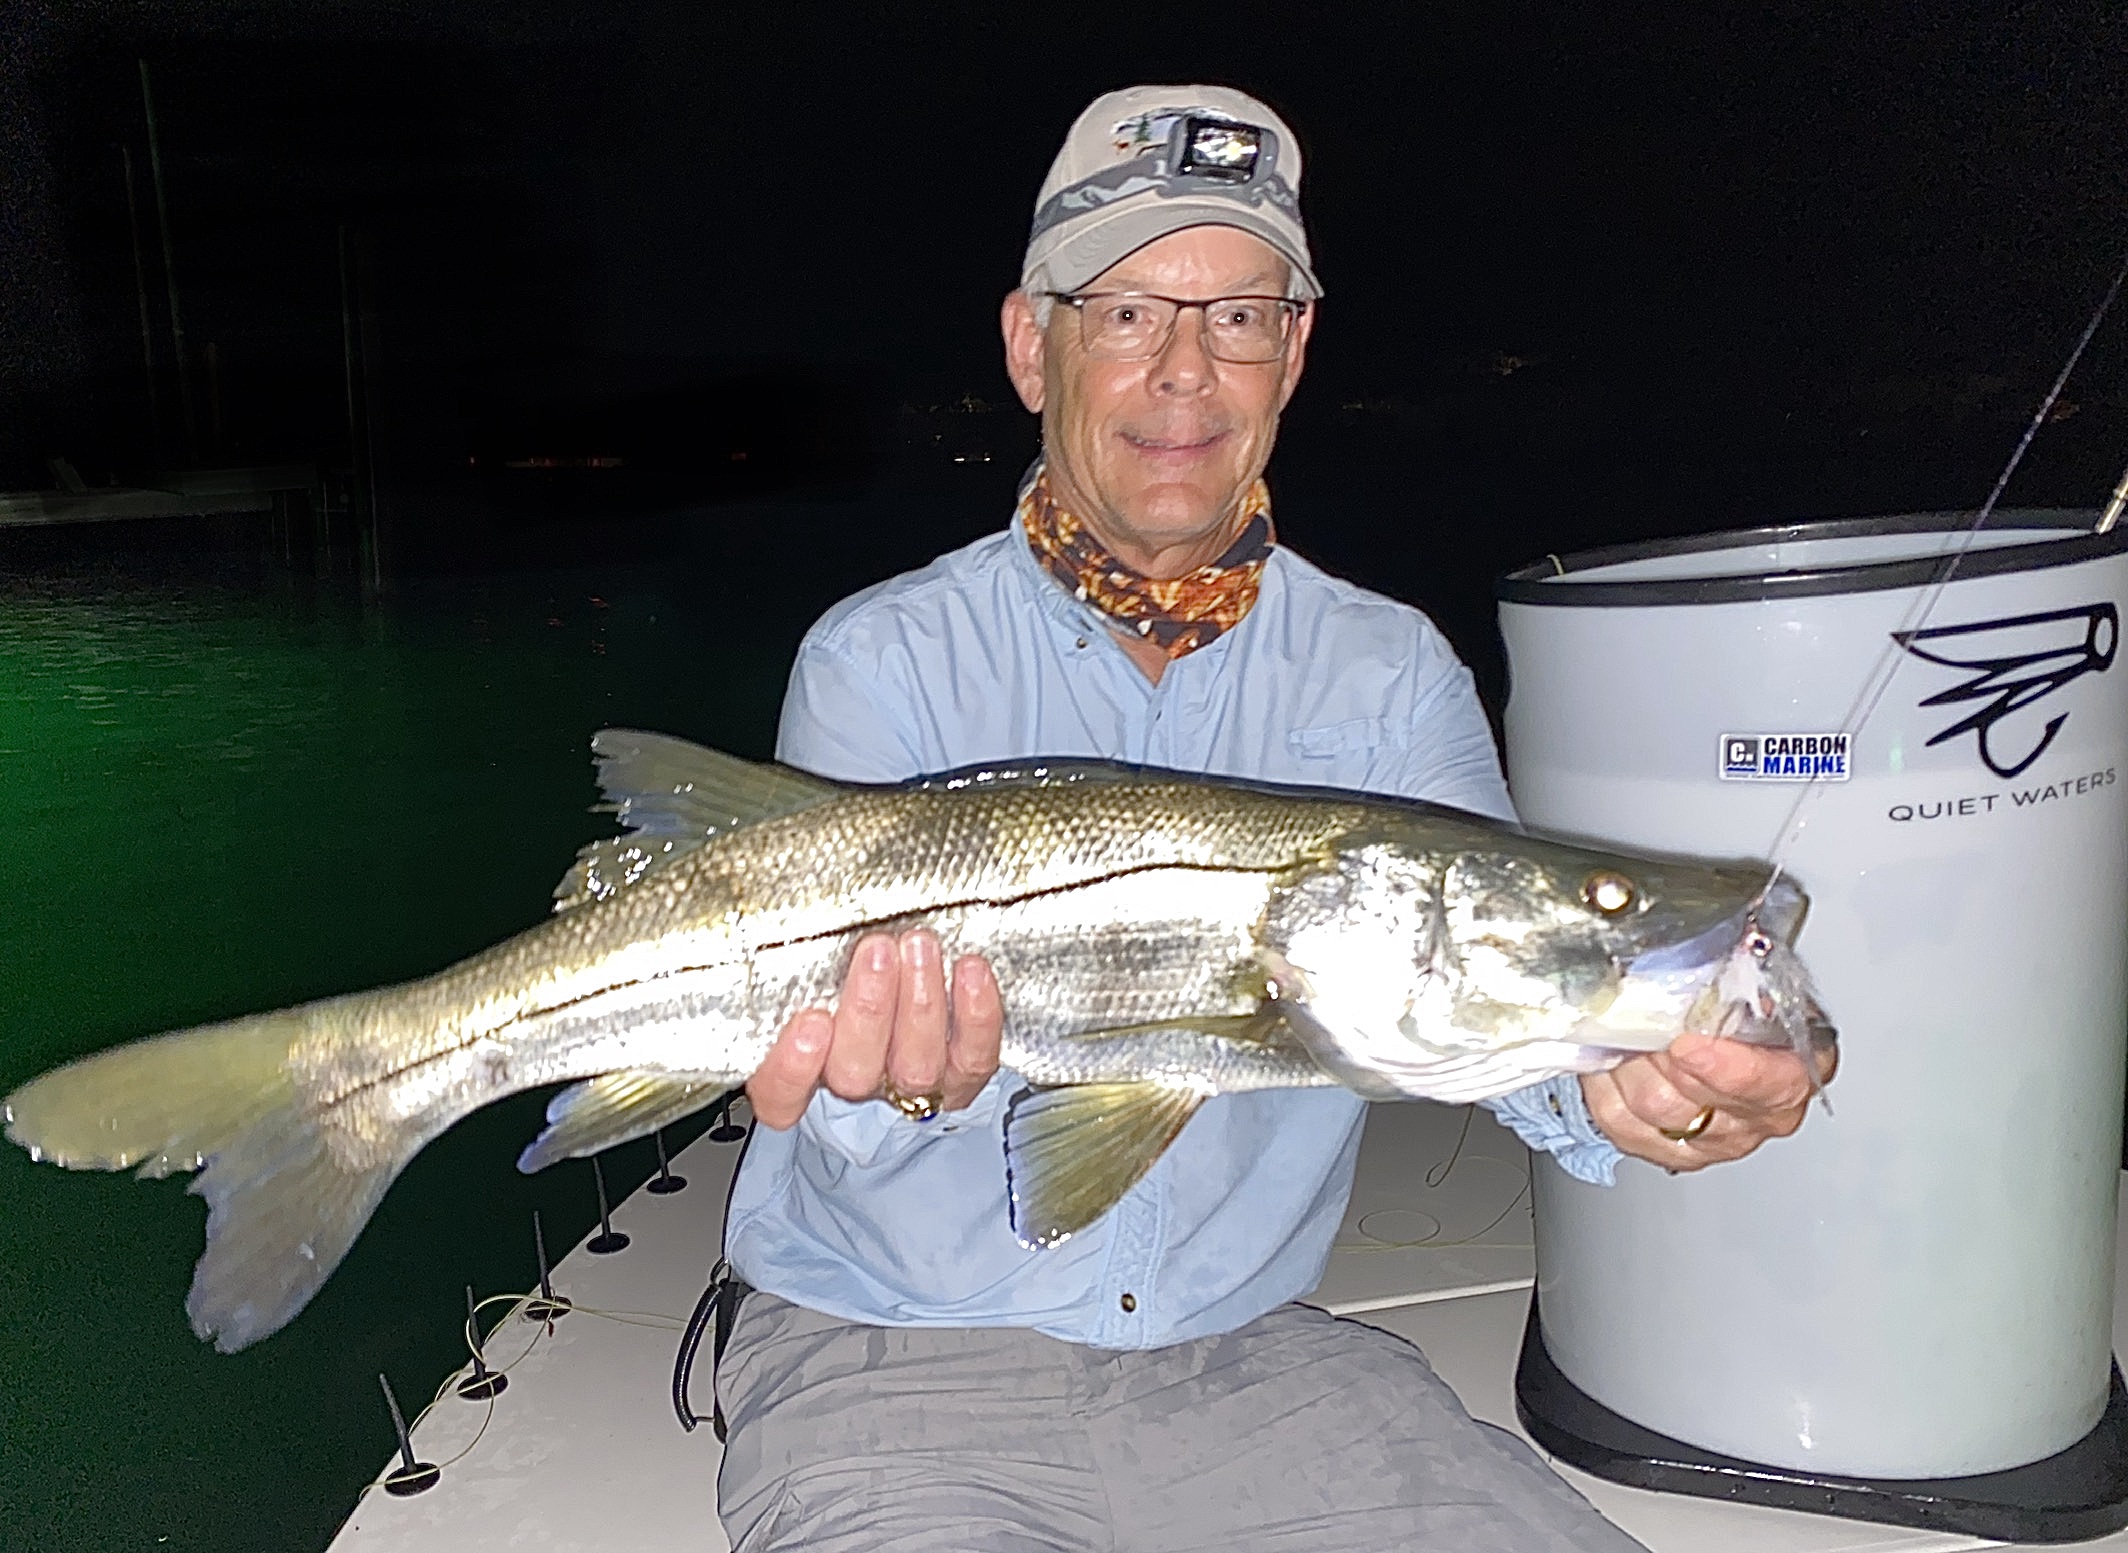 An angler holds his snook up for the camera on the bow of the boat